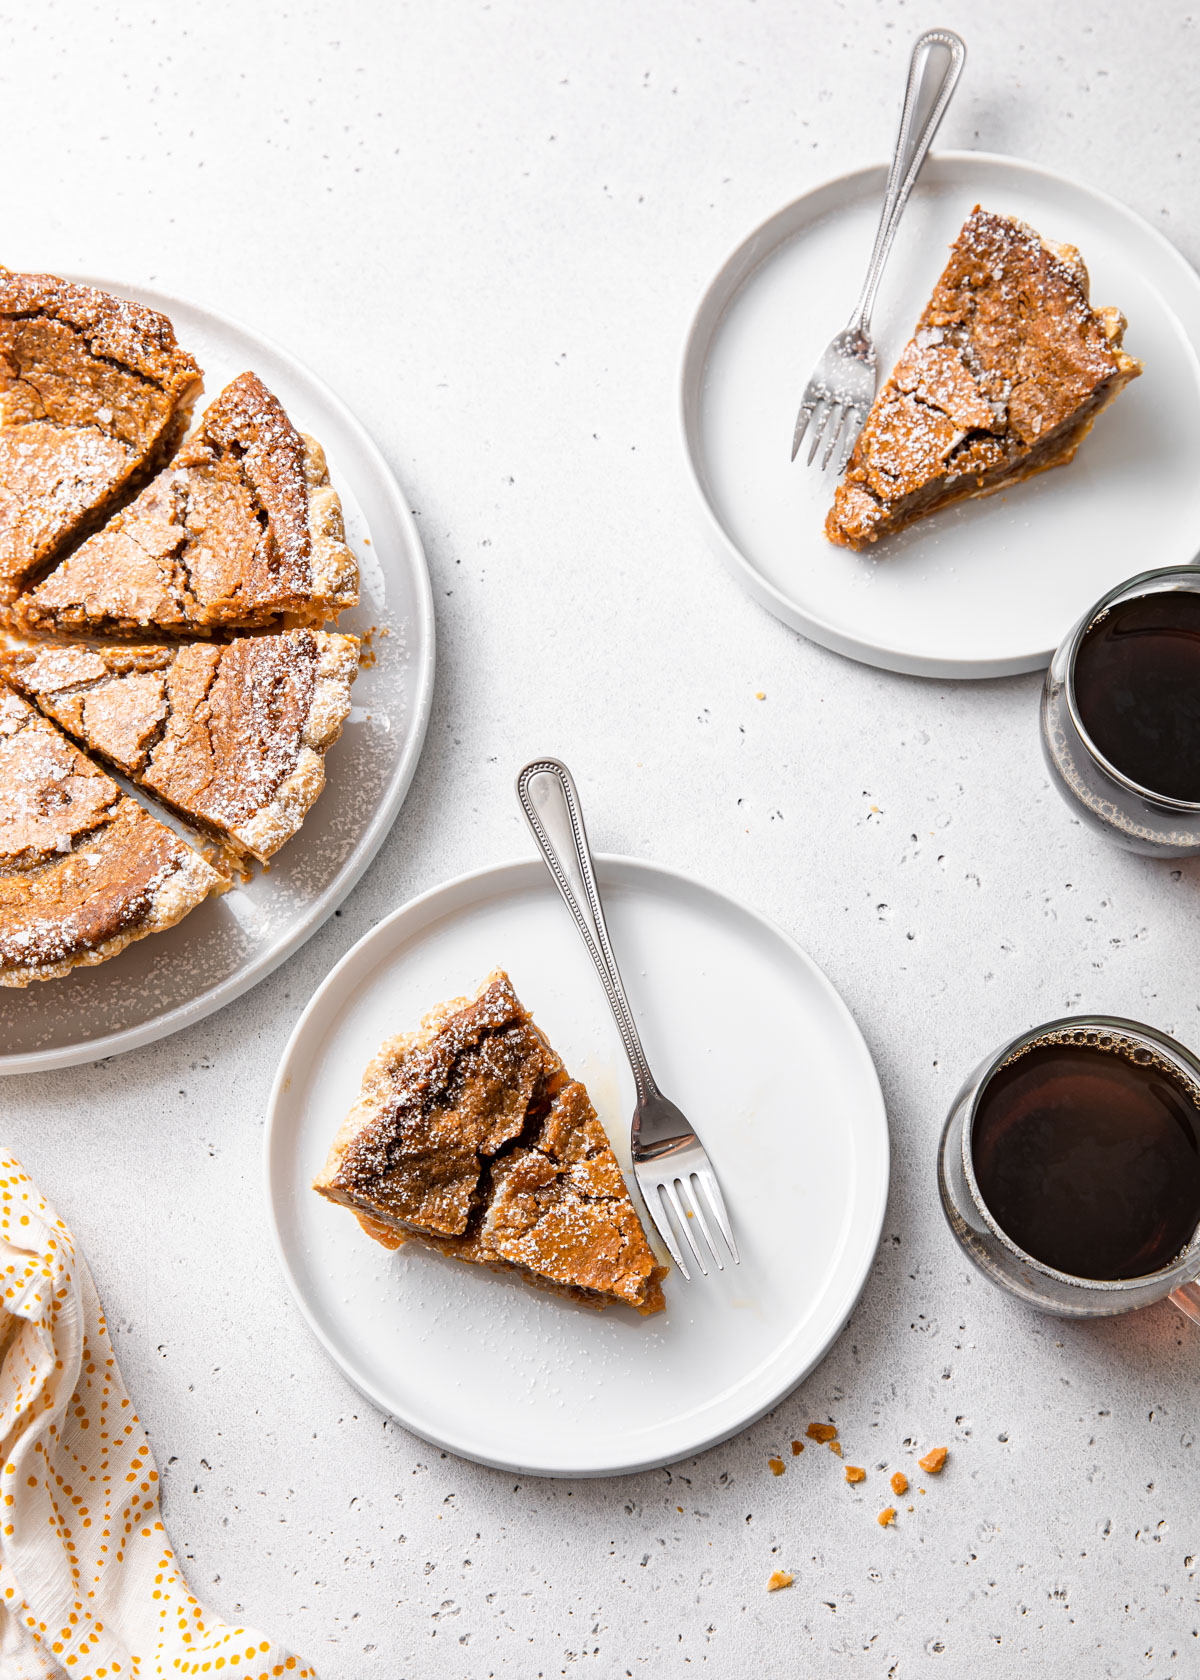 An overhead image of slices of maple sugar pie and cups of coffee